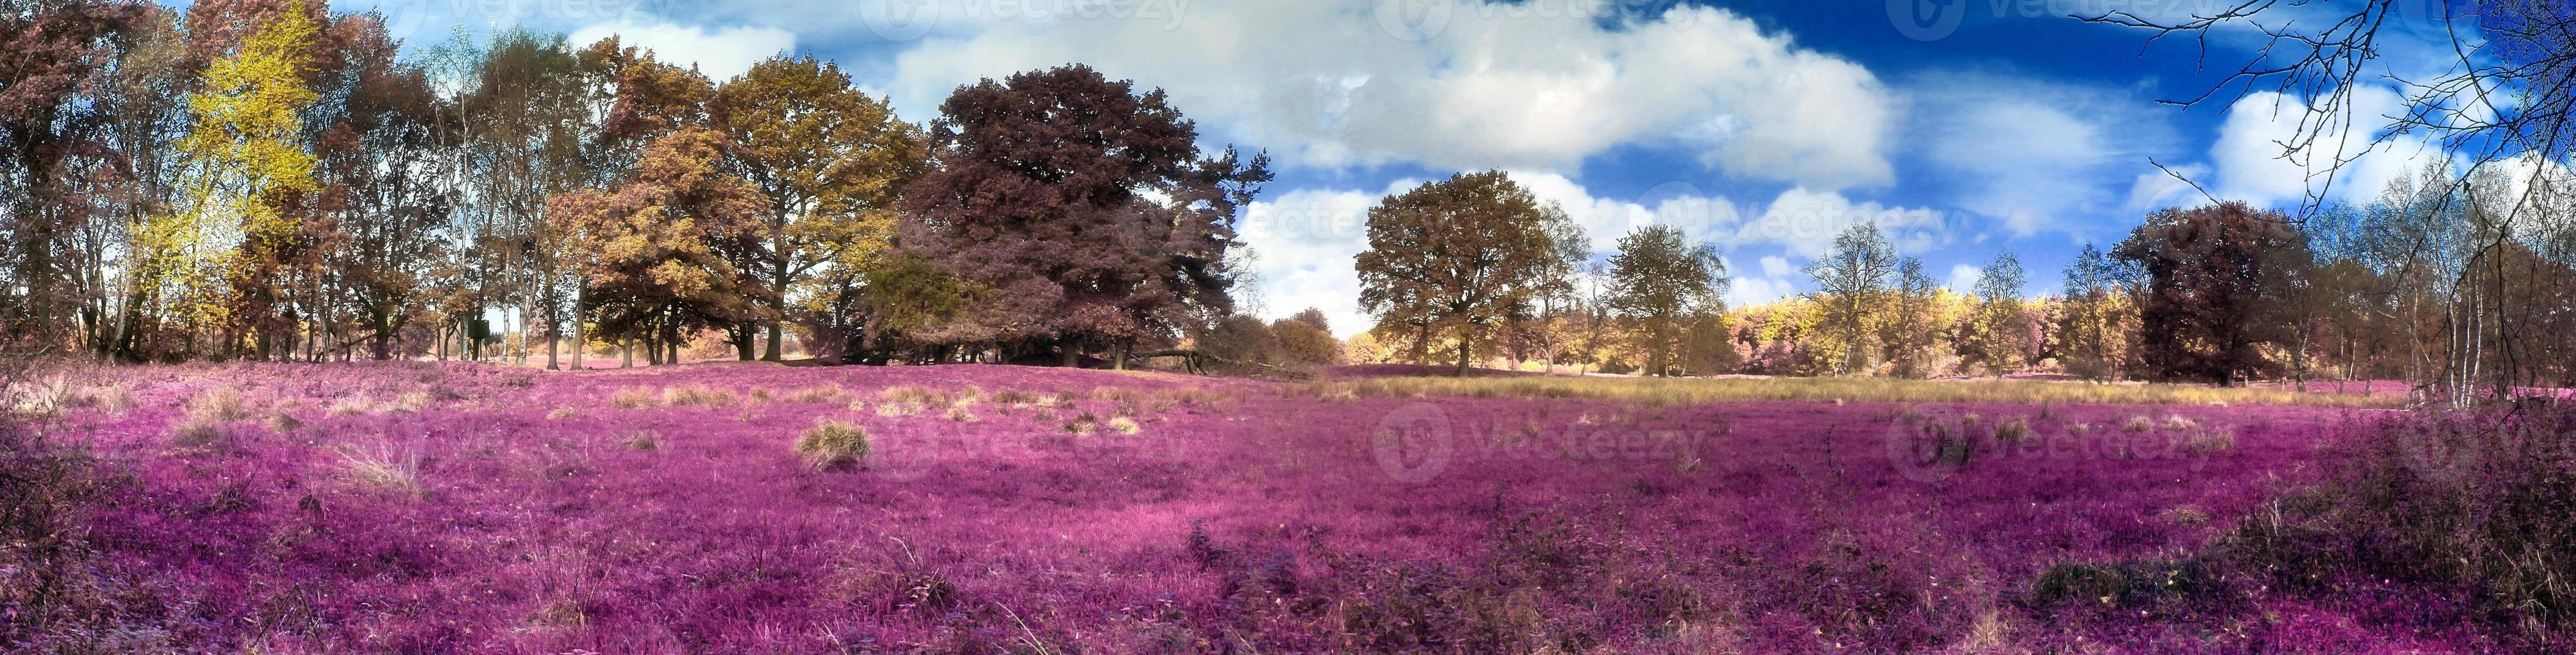 Beautiful and colorful fantasy landscape in an asian purple infrared style photo